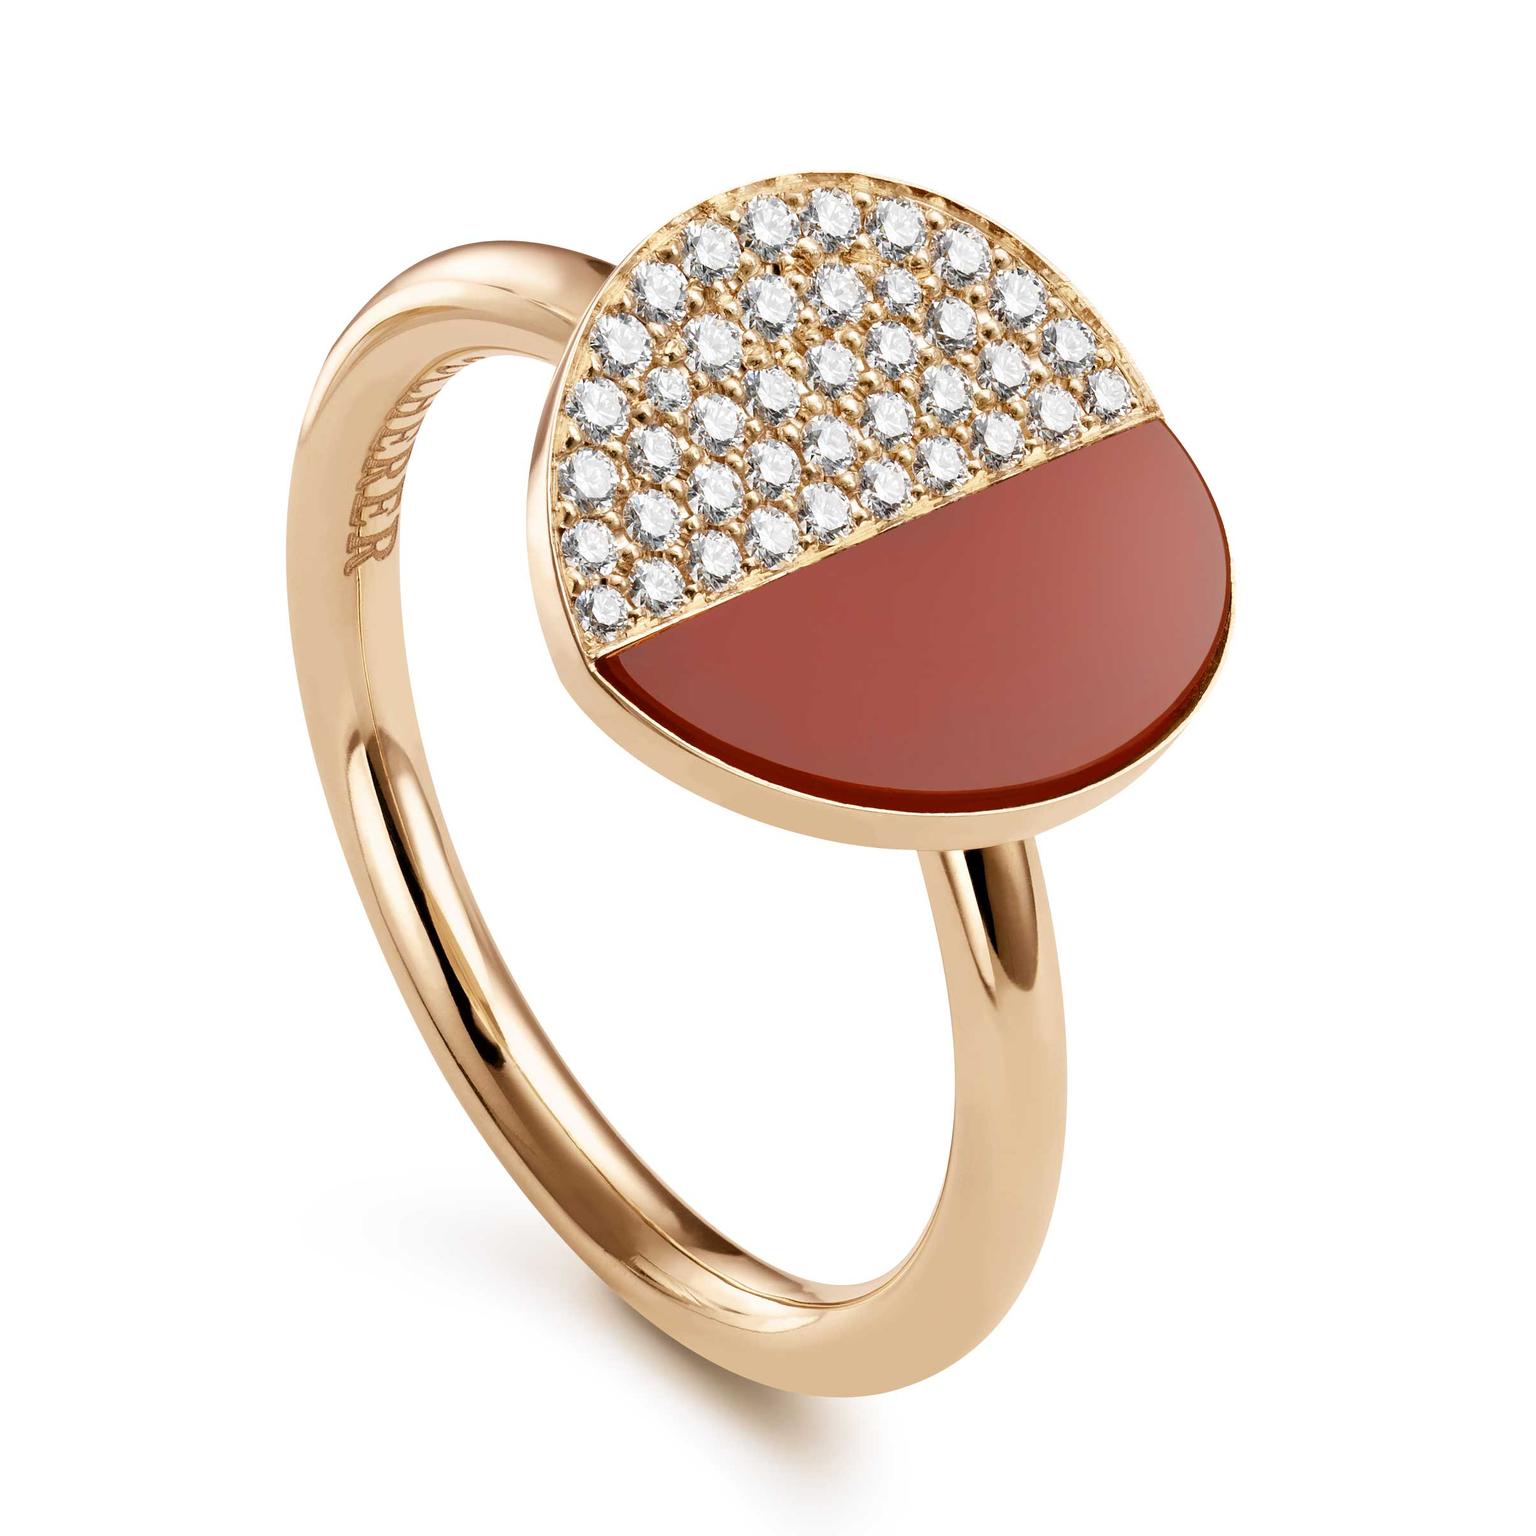 Bucherer B Dimension ring with diamonds and carnelian in rose gold Price £1450